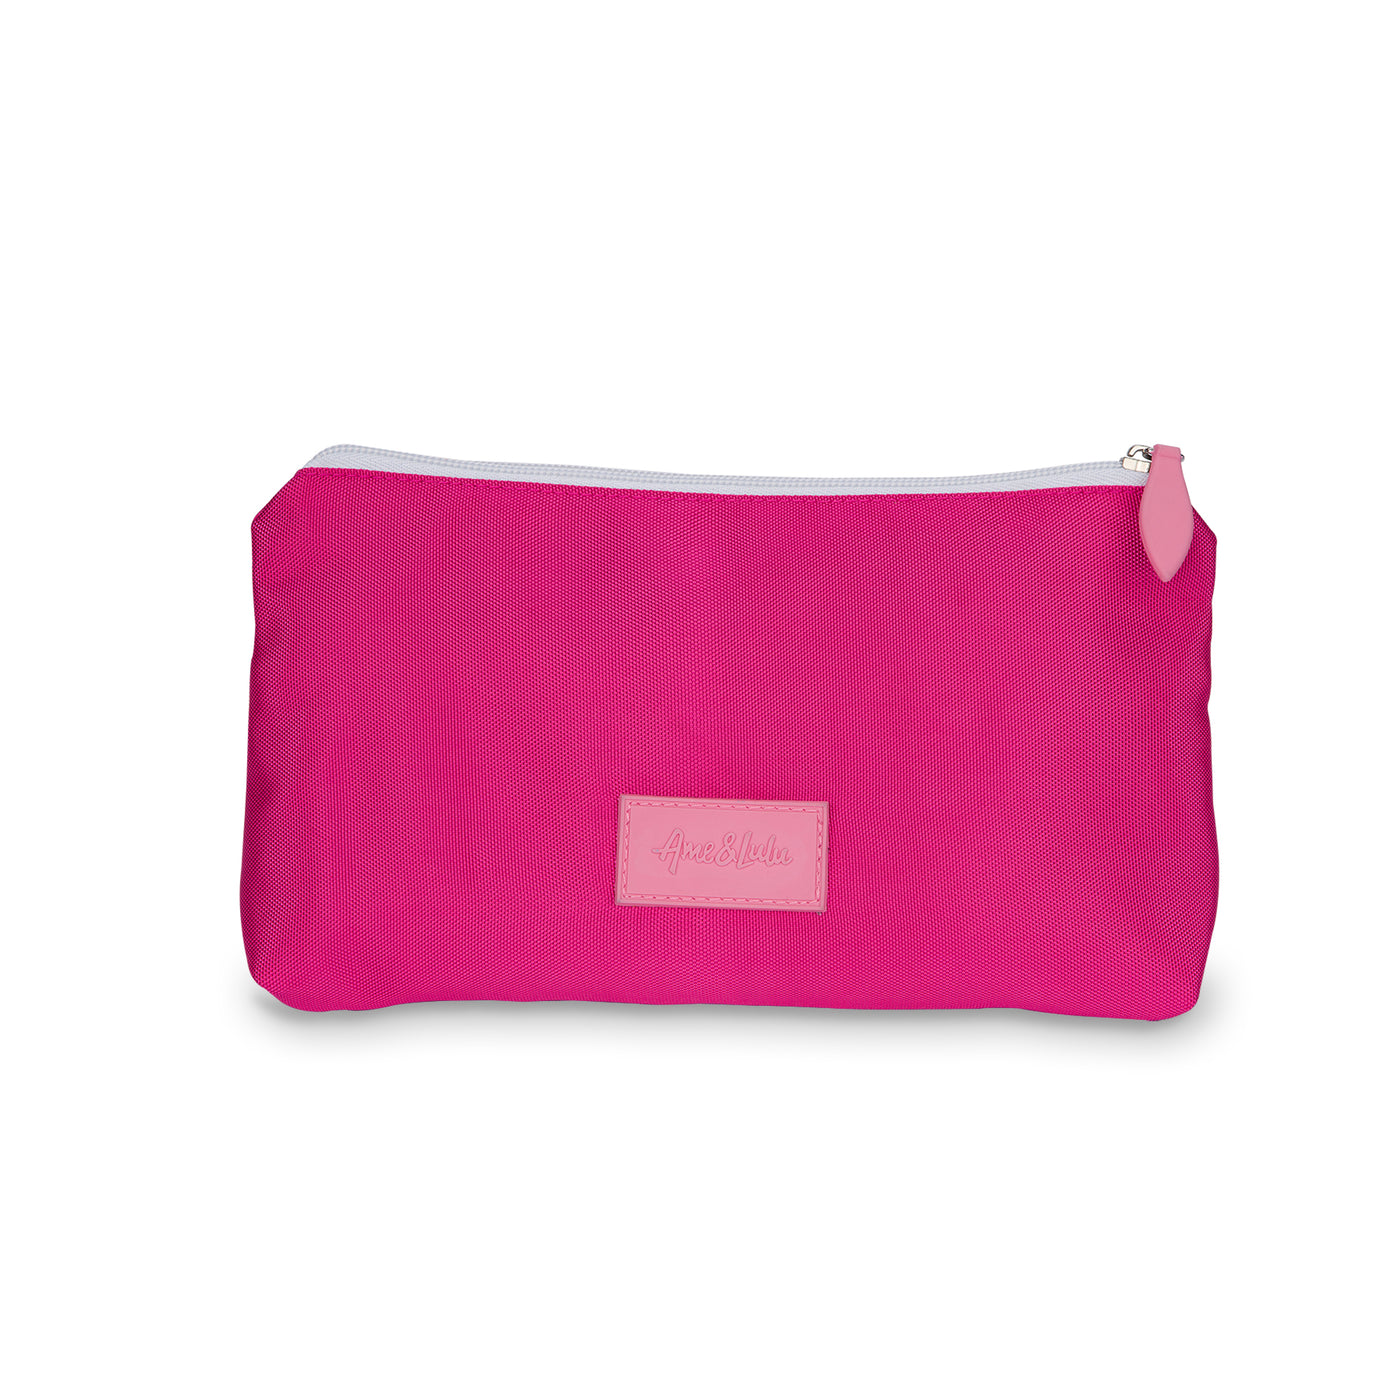 Back view of hot pink everyday pouch